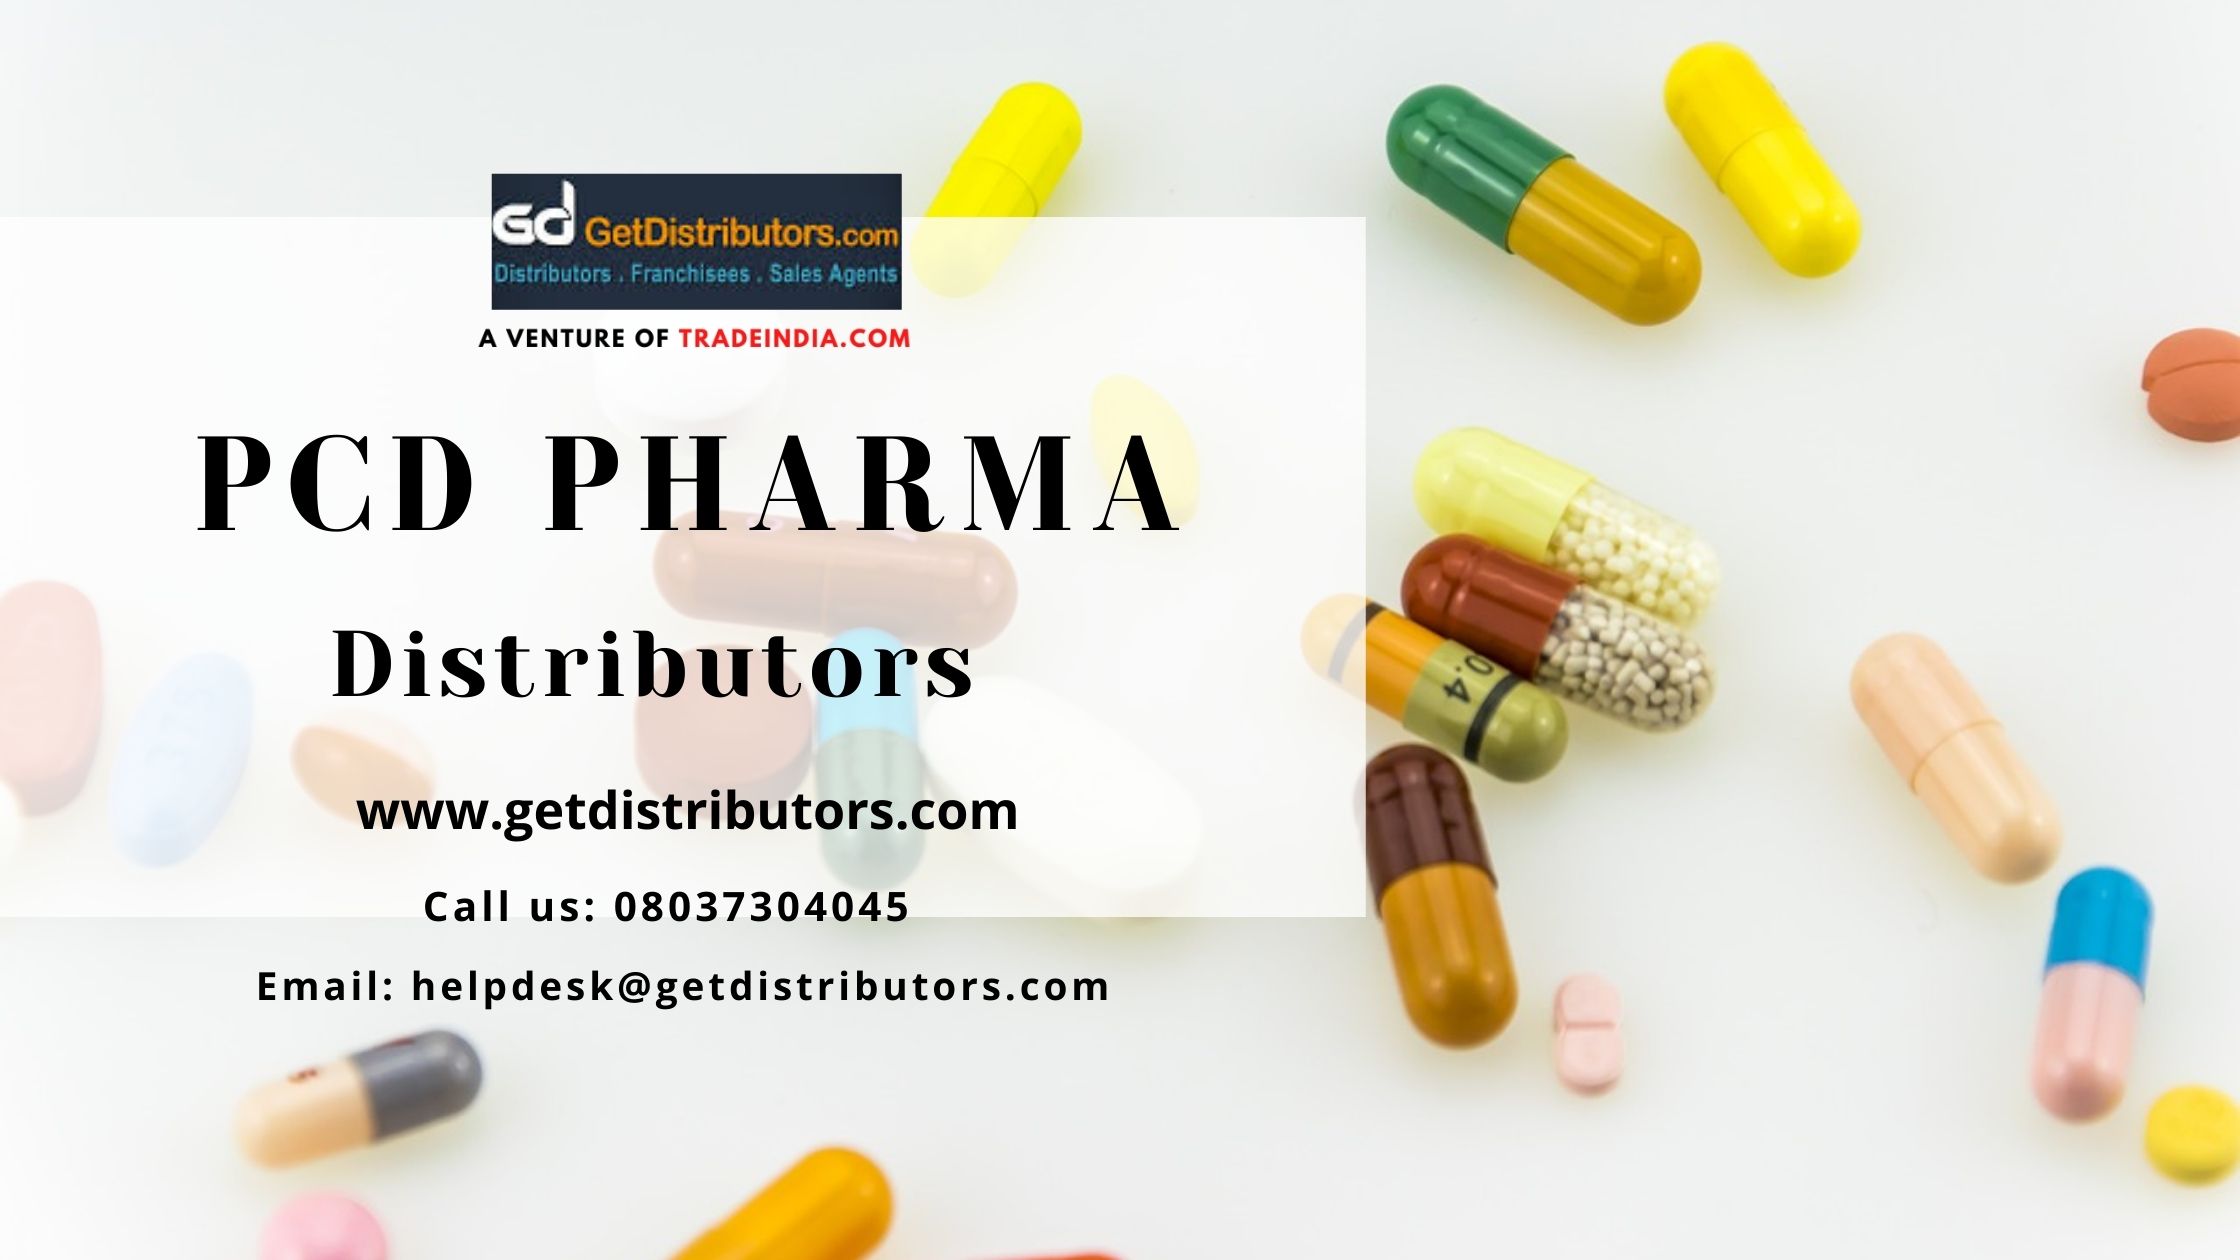 What is the Scope of PCD Pharma Distribution Business in India?